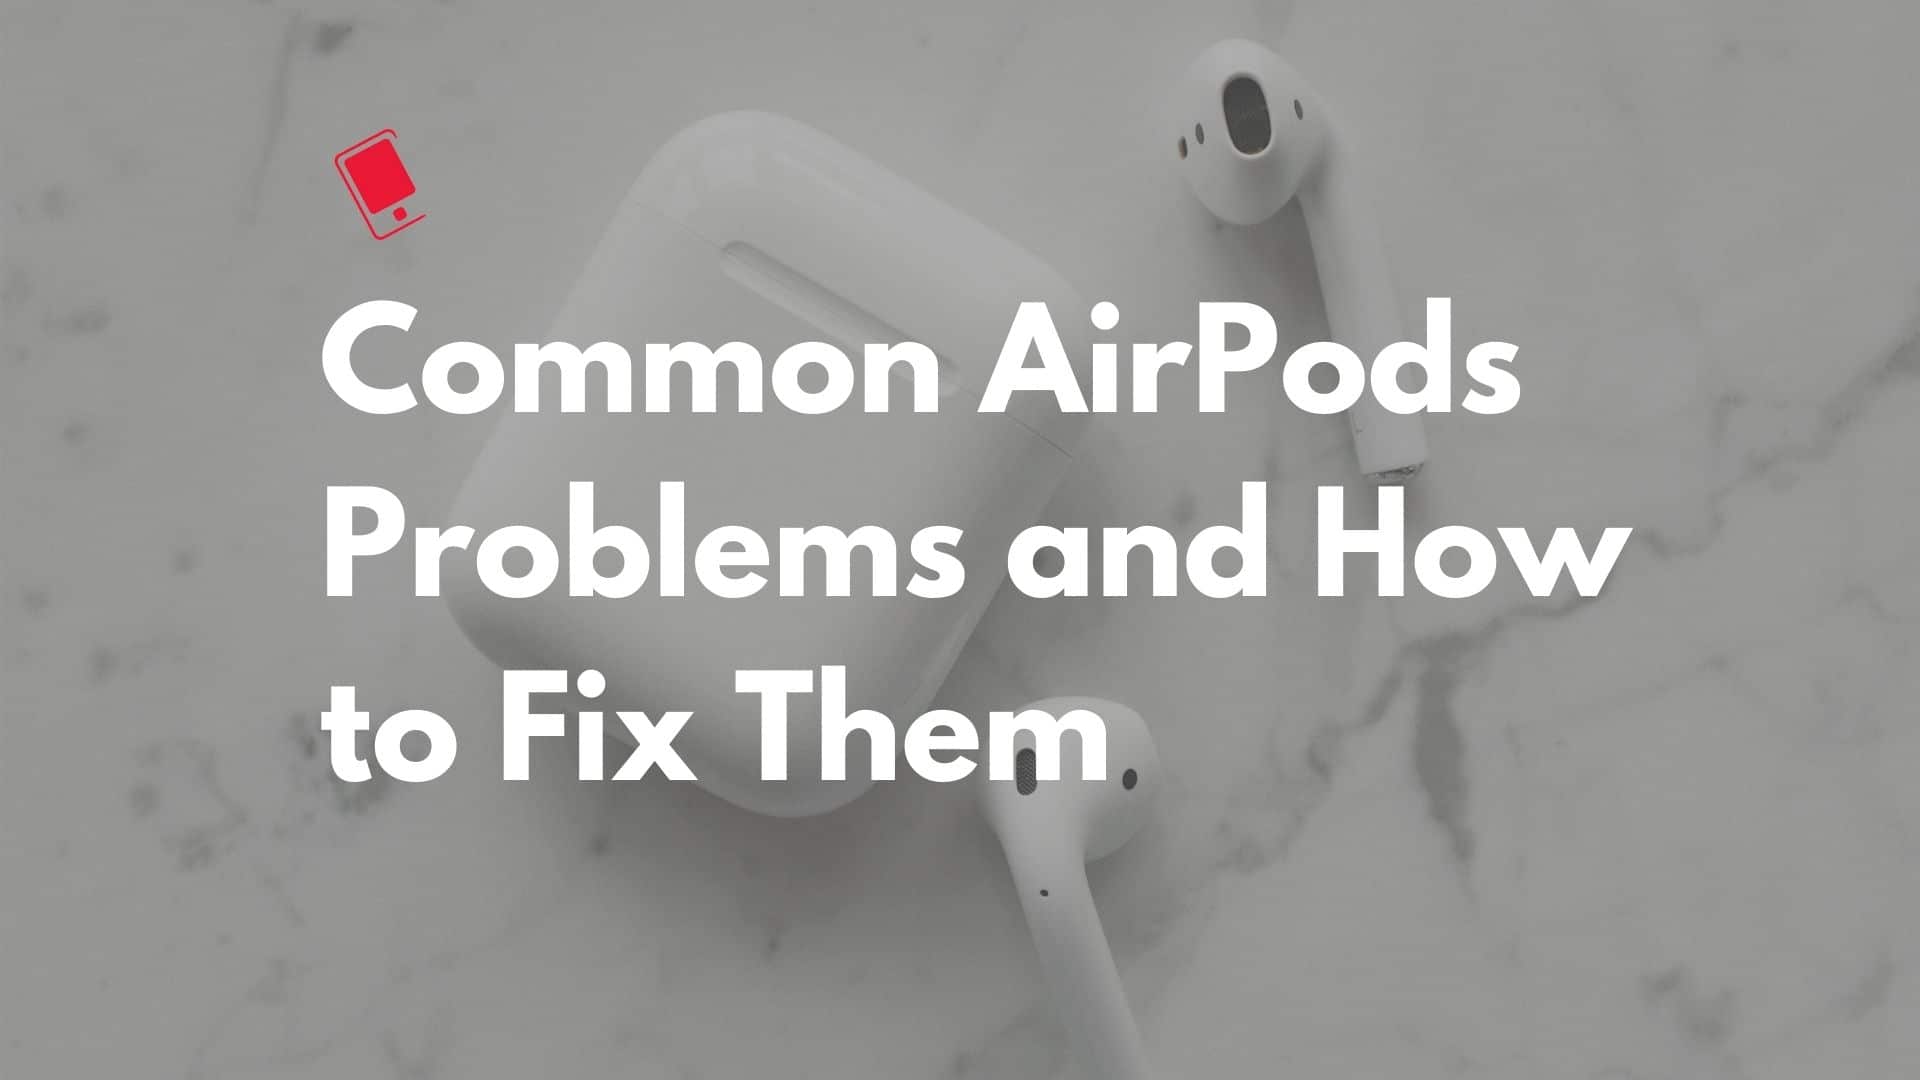 Common AirPods Issues and How to Fix Them